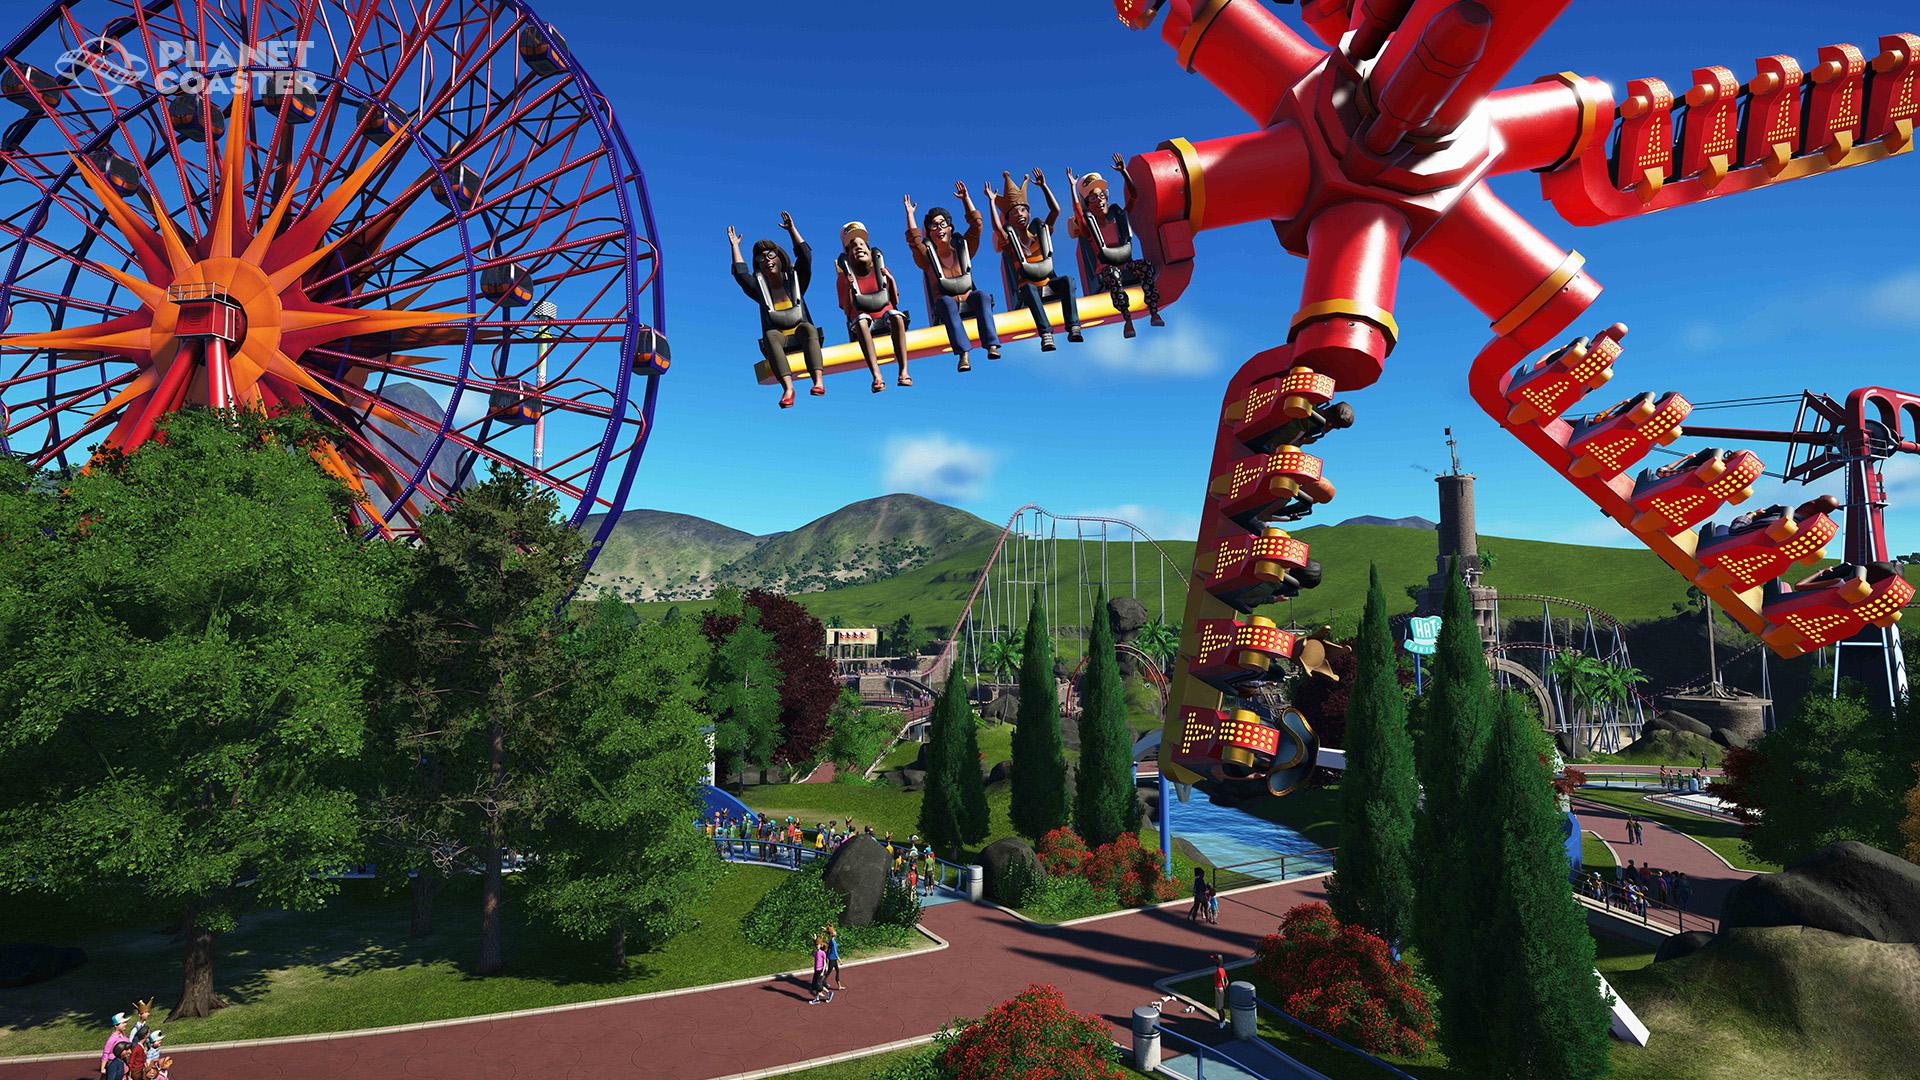 Buy Planet Coaster PC Steam CD Key from $9.03 (-95%) - Cheapest Price